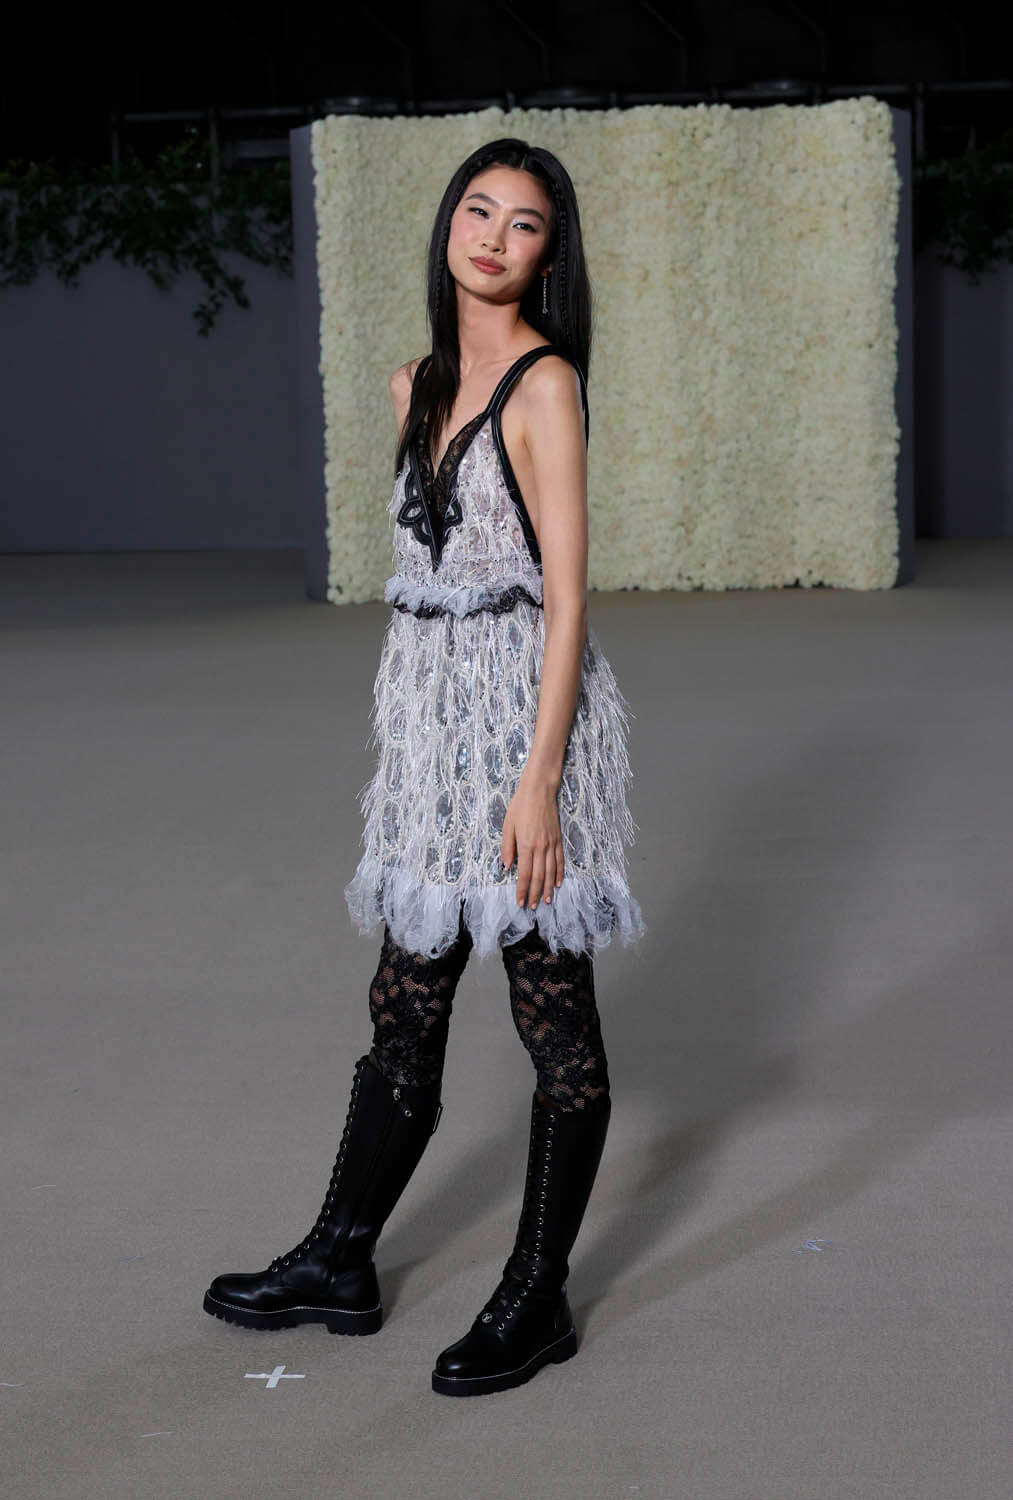 Sequins, leather and more feathers, and Louis Vuitton at the